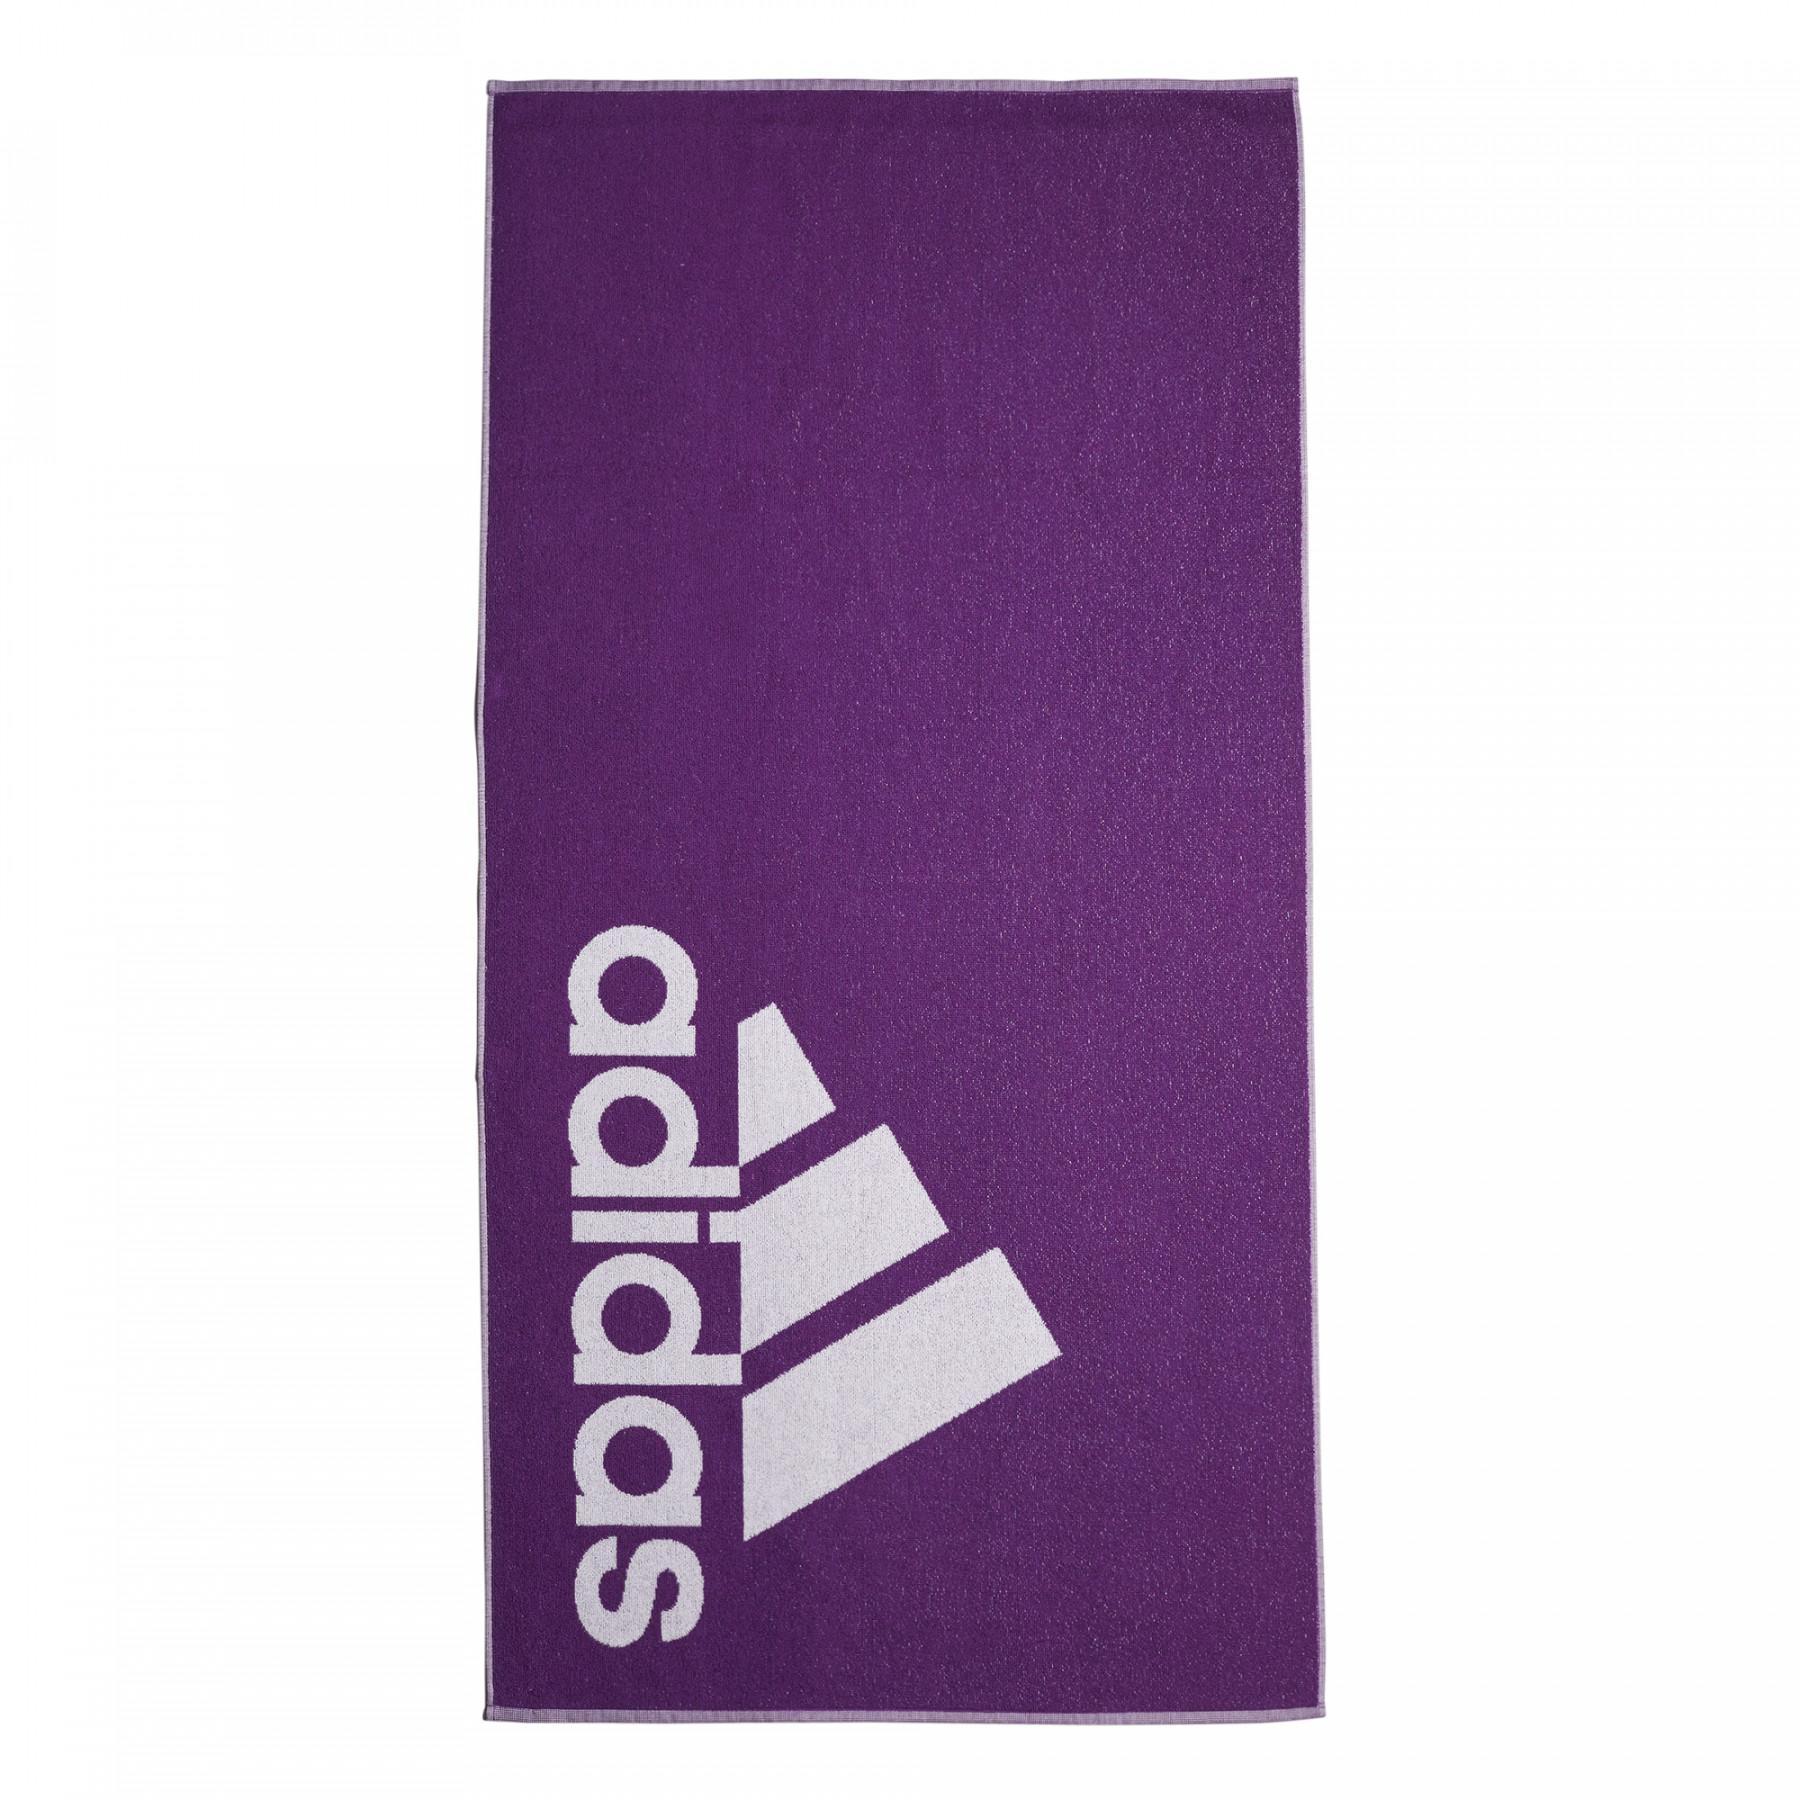 Towel <exclude>adidas</exclude> L